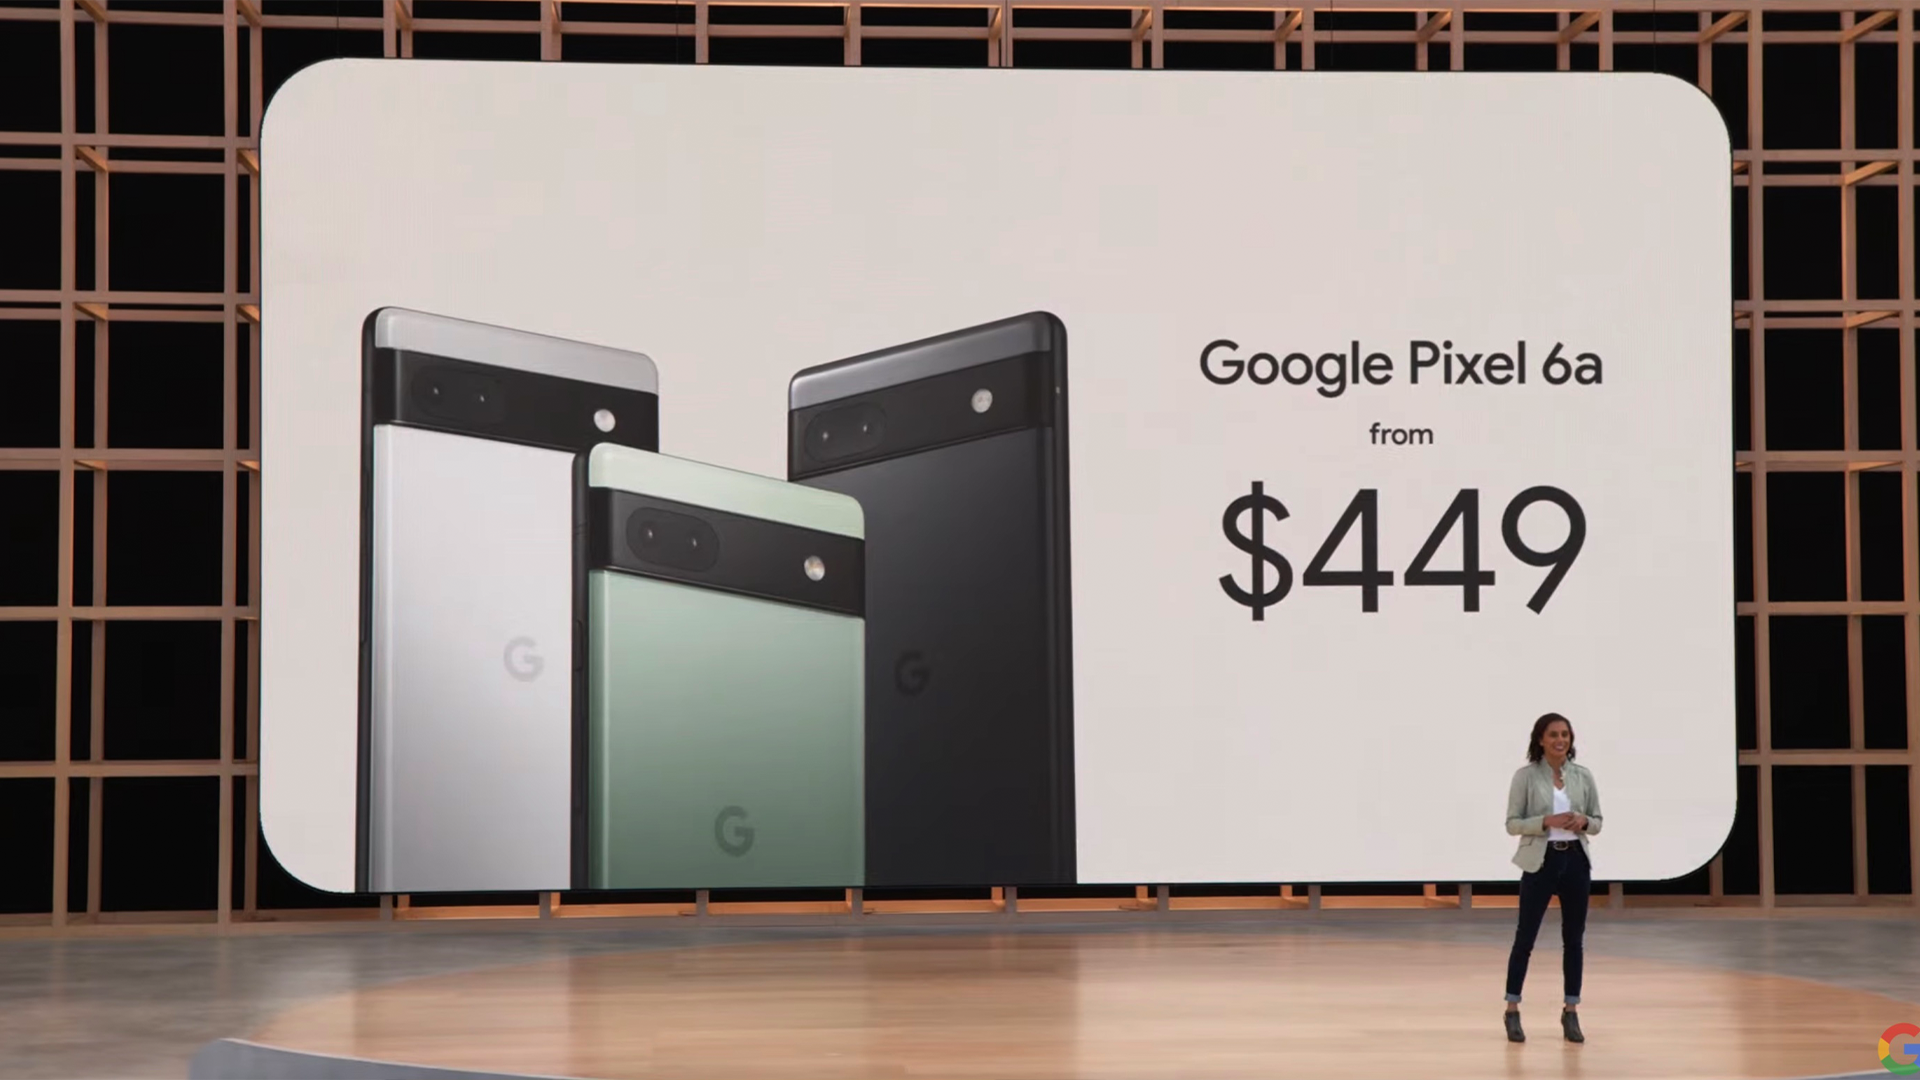 Google announcing the Pixel 6a live on stage at the I/O 2022 conference.